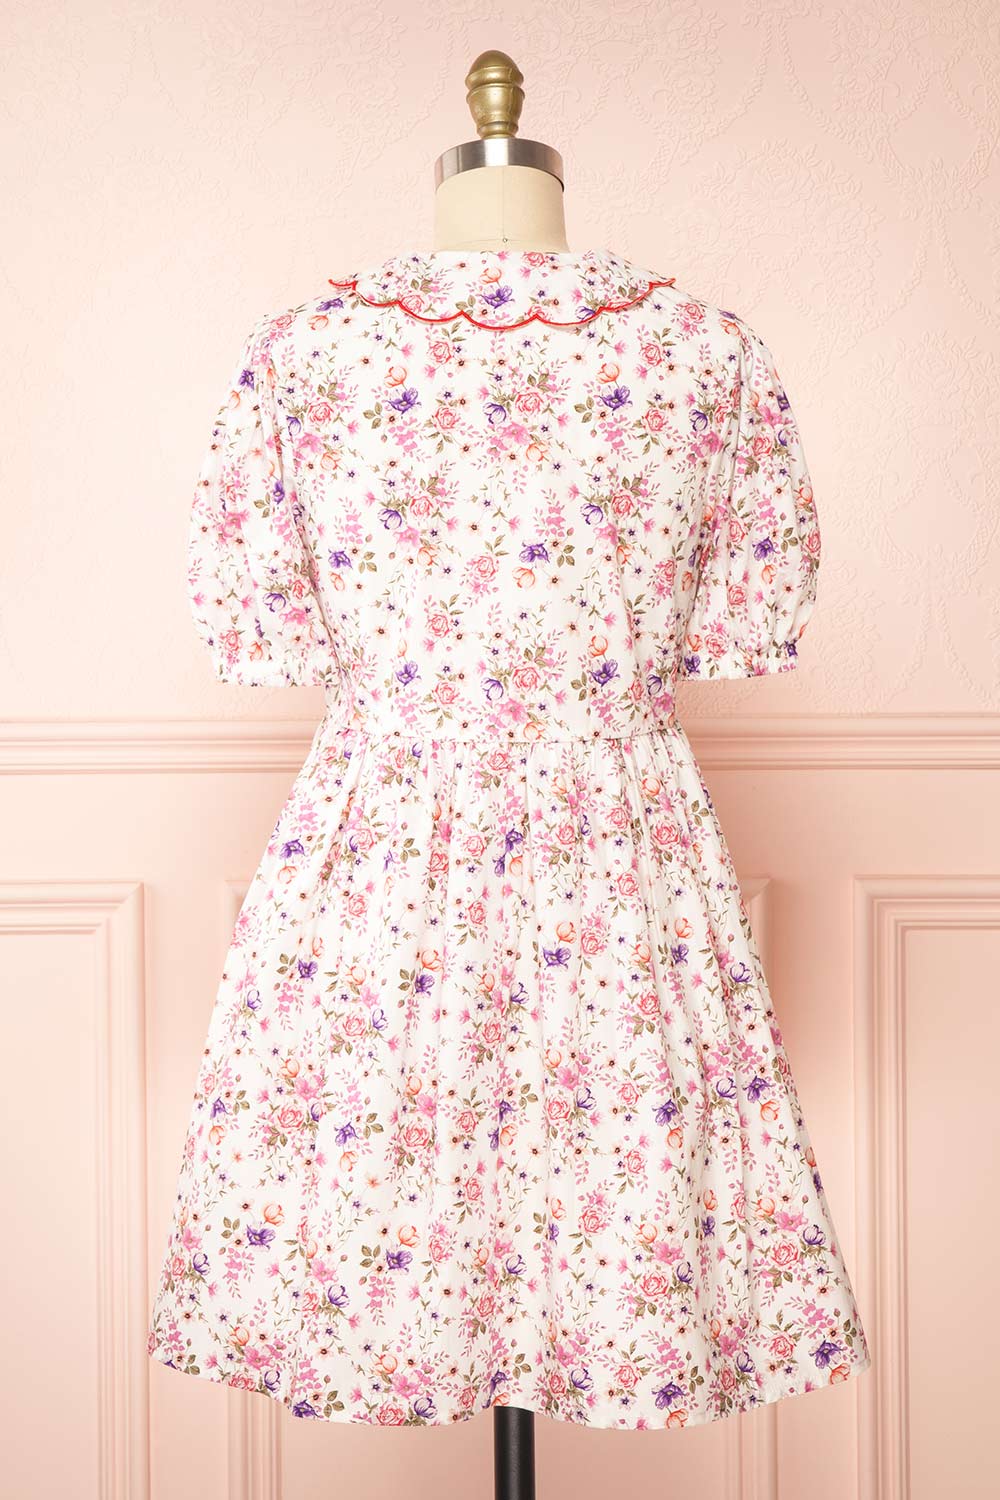 Crustalam Floral Babydoll Dress w/ Scalloped Collar | Boutique 1861 back view